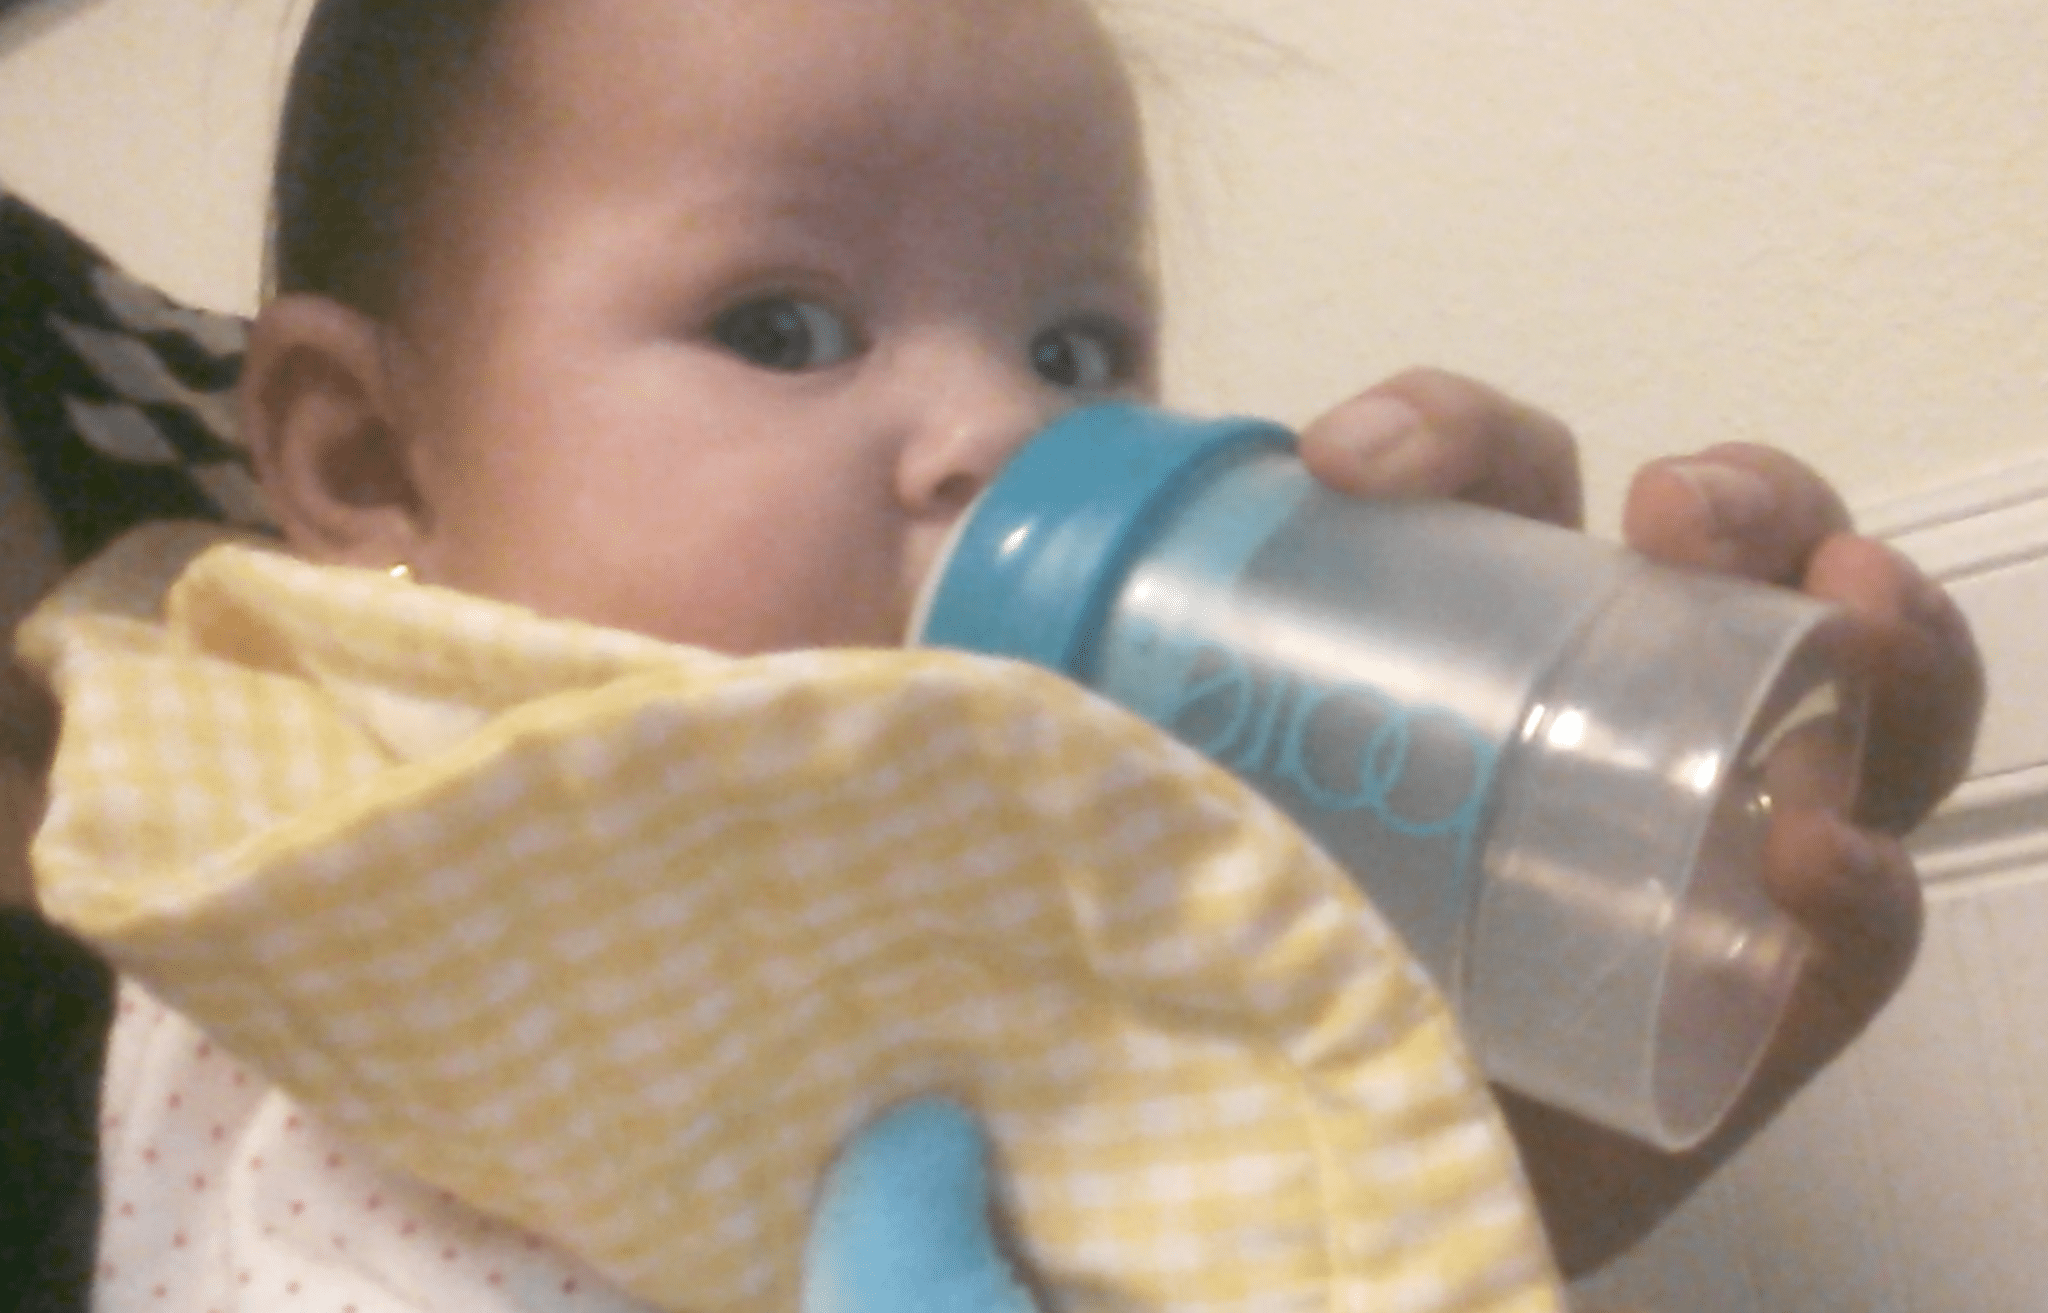 The longest she has ever latched on to a bottle